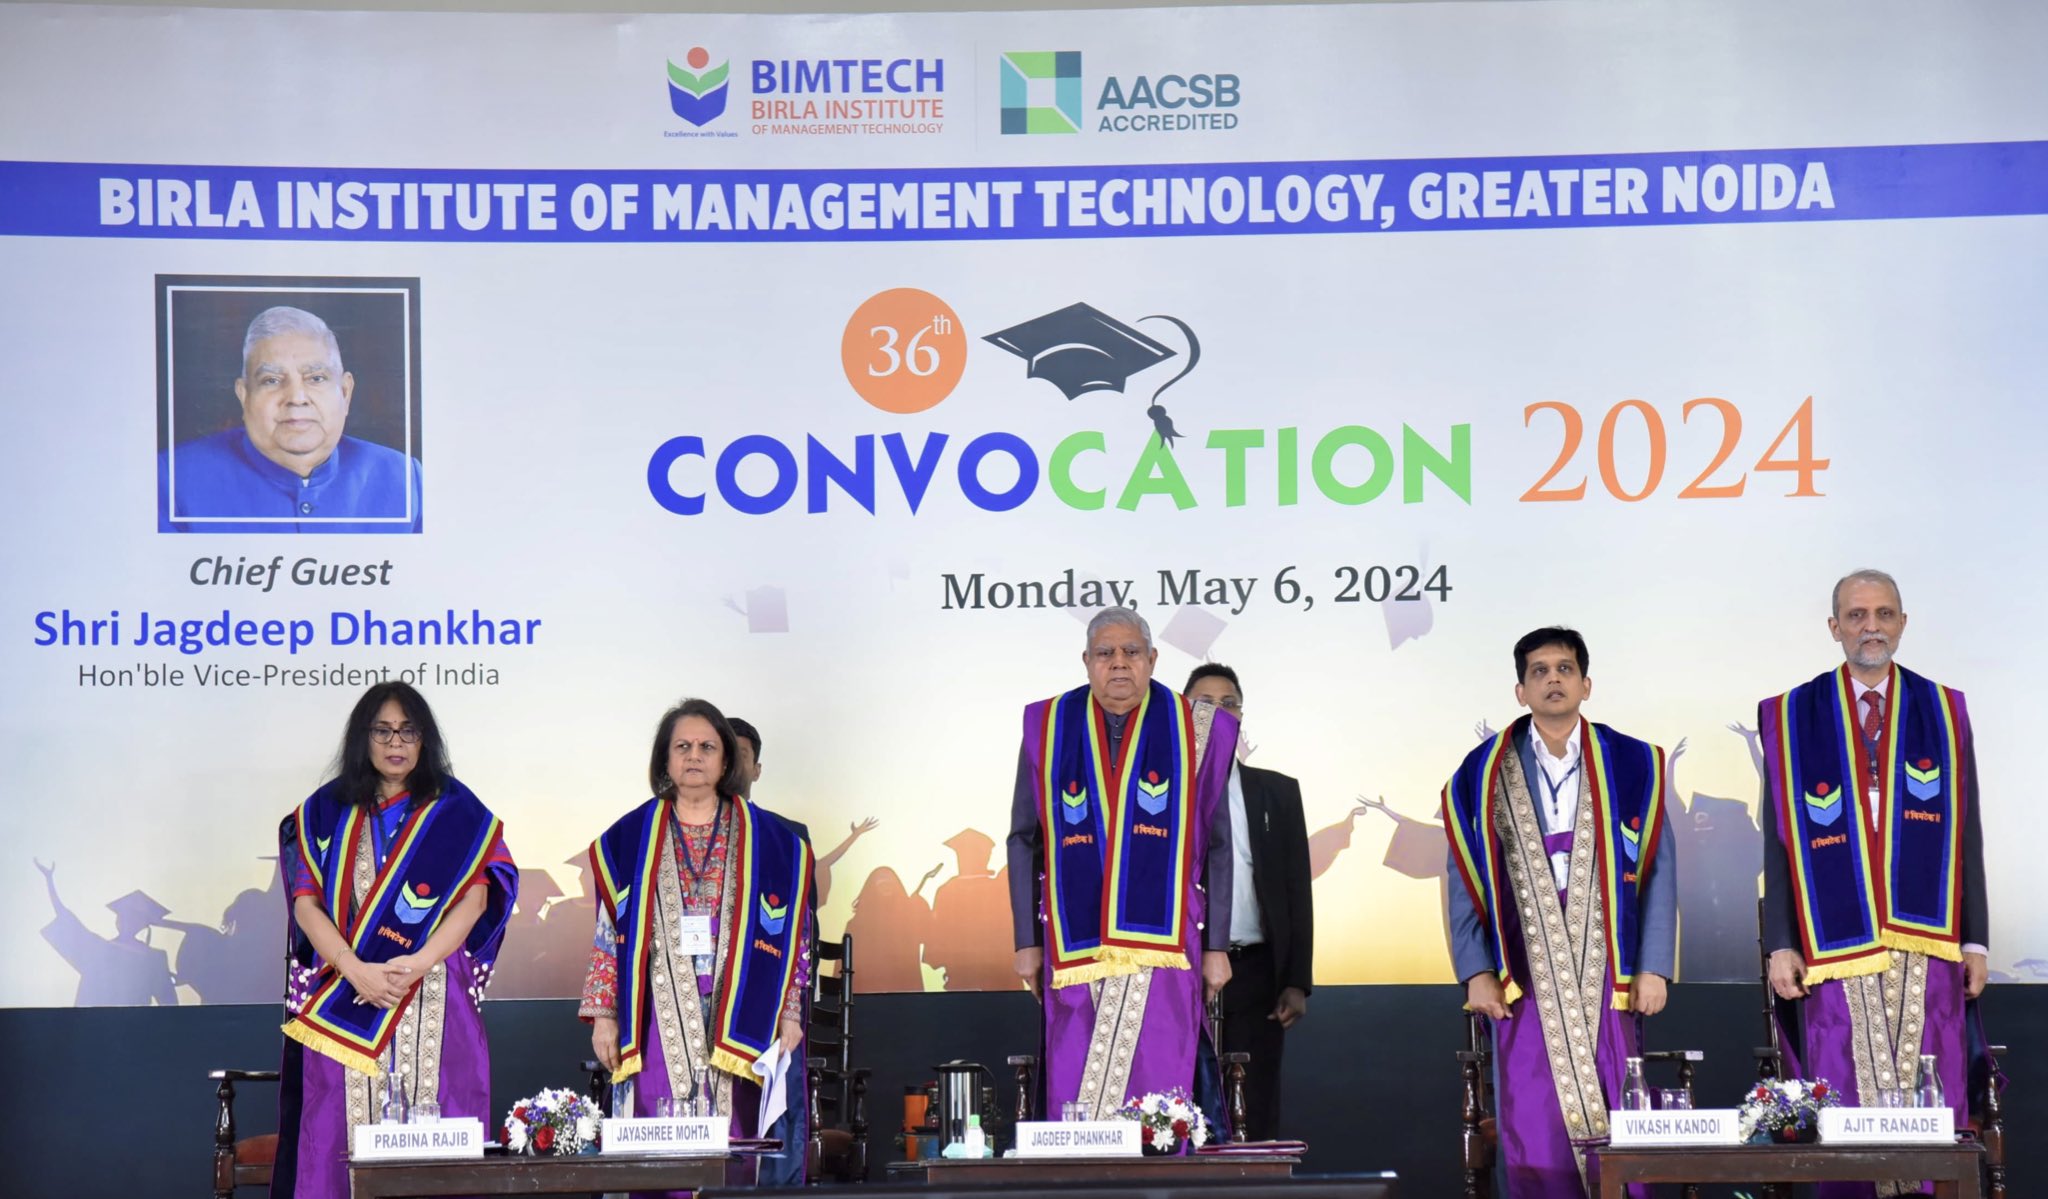 The Vice-President, Shri Jagdeep Dhankhar at the 36th Convocation of Birla Institute of Management Technology in Greater Noida, Uttar Pradesh on May 6, 2024.